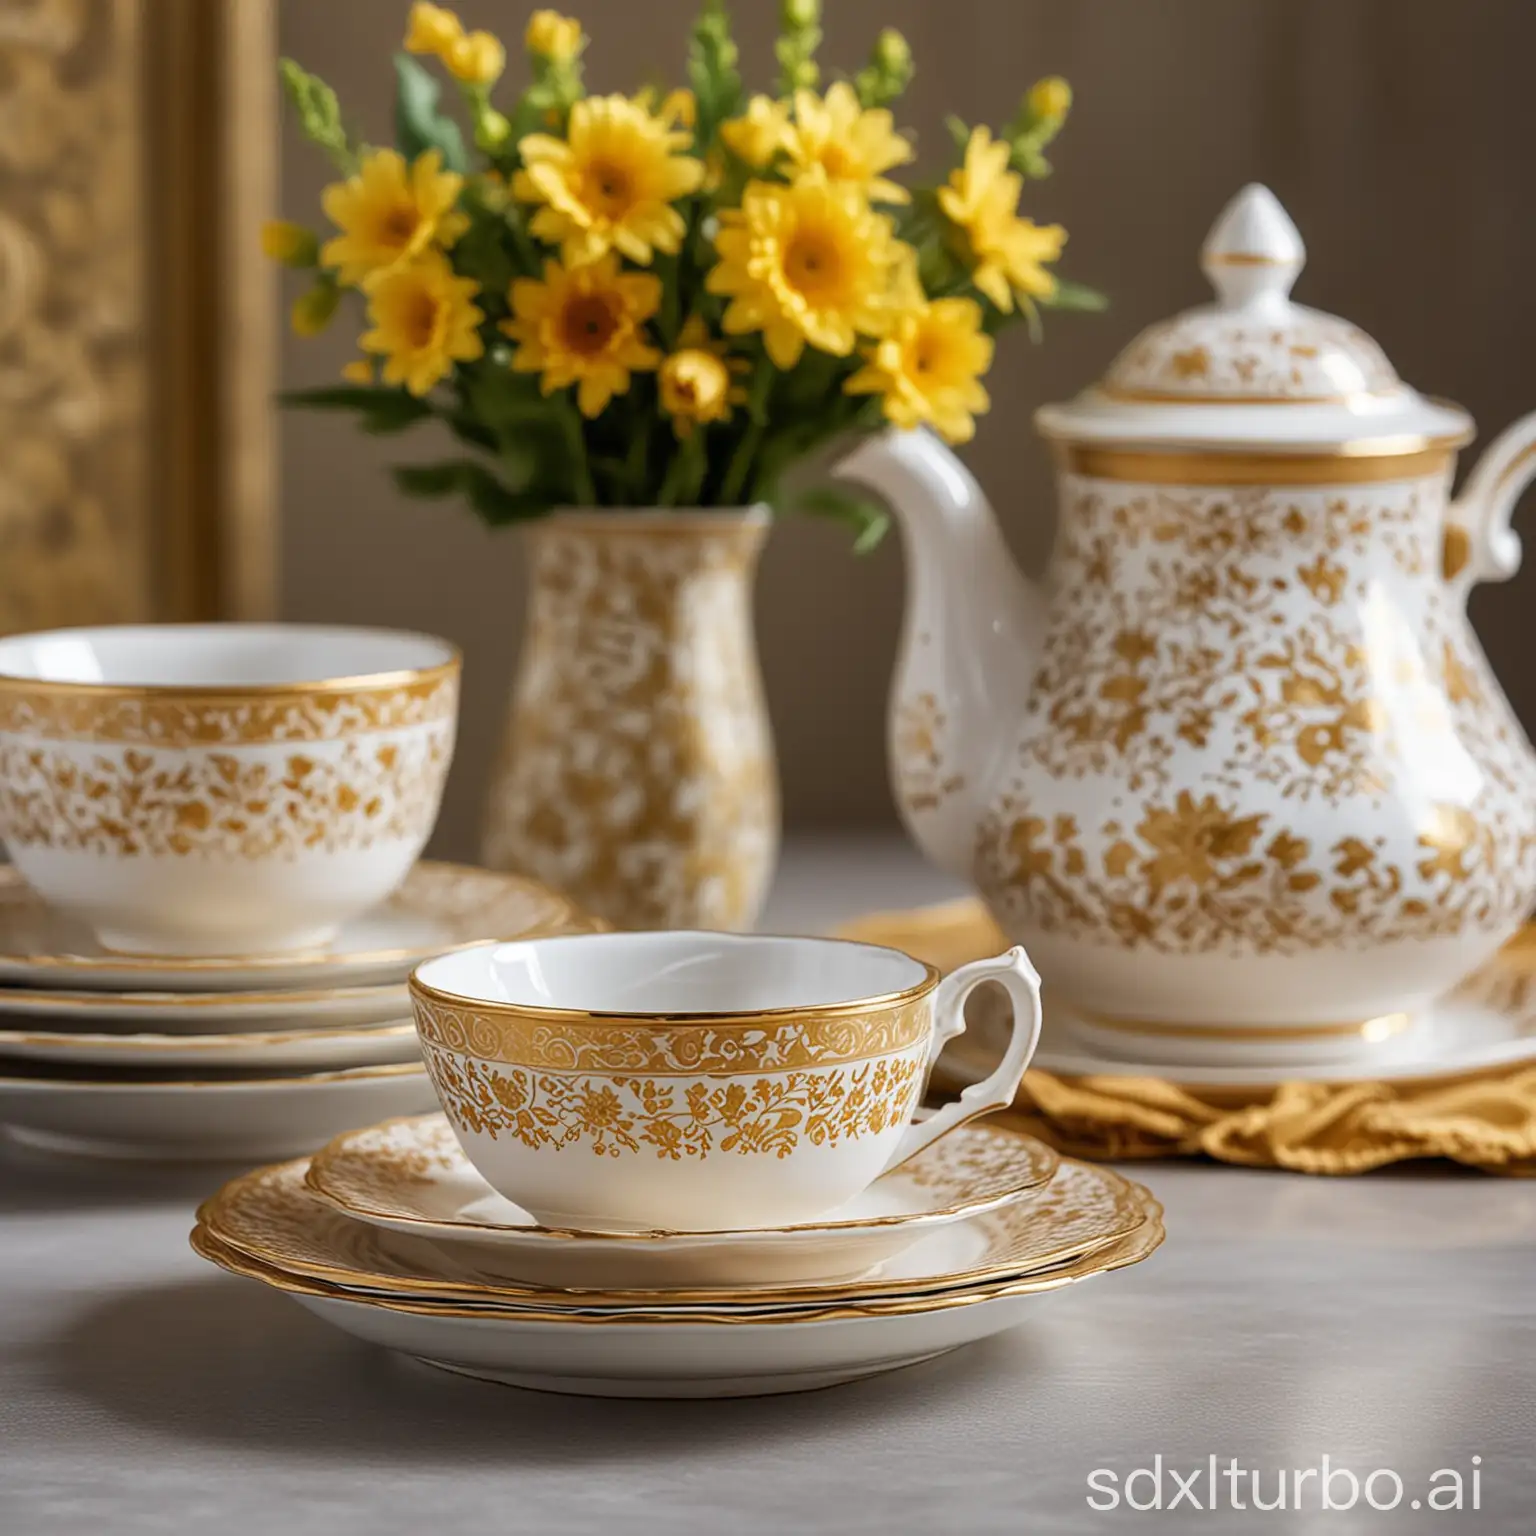 A stack of plates with a bowl in the middle, adorned with golden floral patterns and a gold rim, the focus is precise, the background is blurred, with a vase on the left and a teapot on the right.